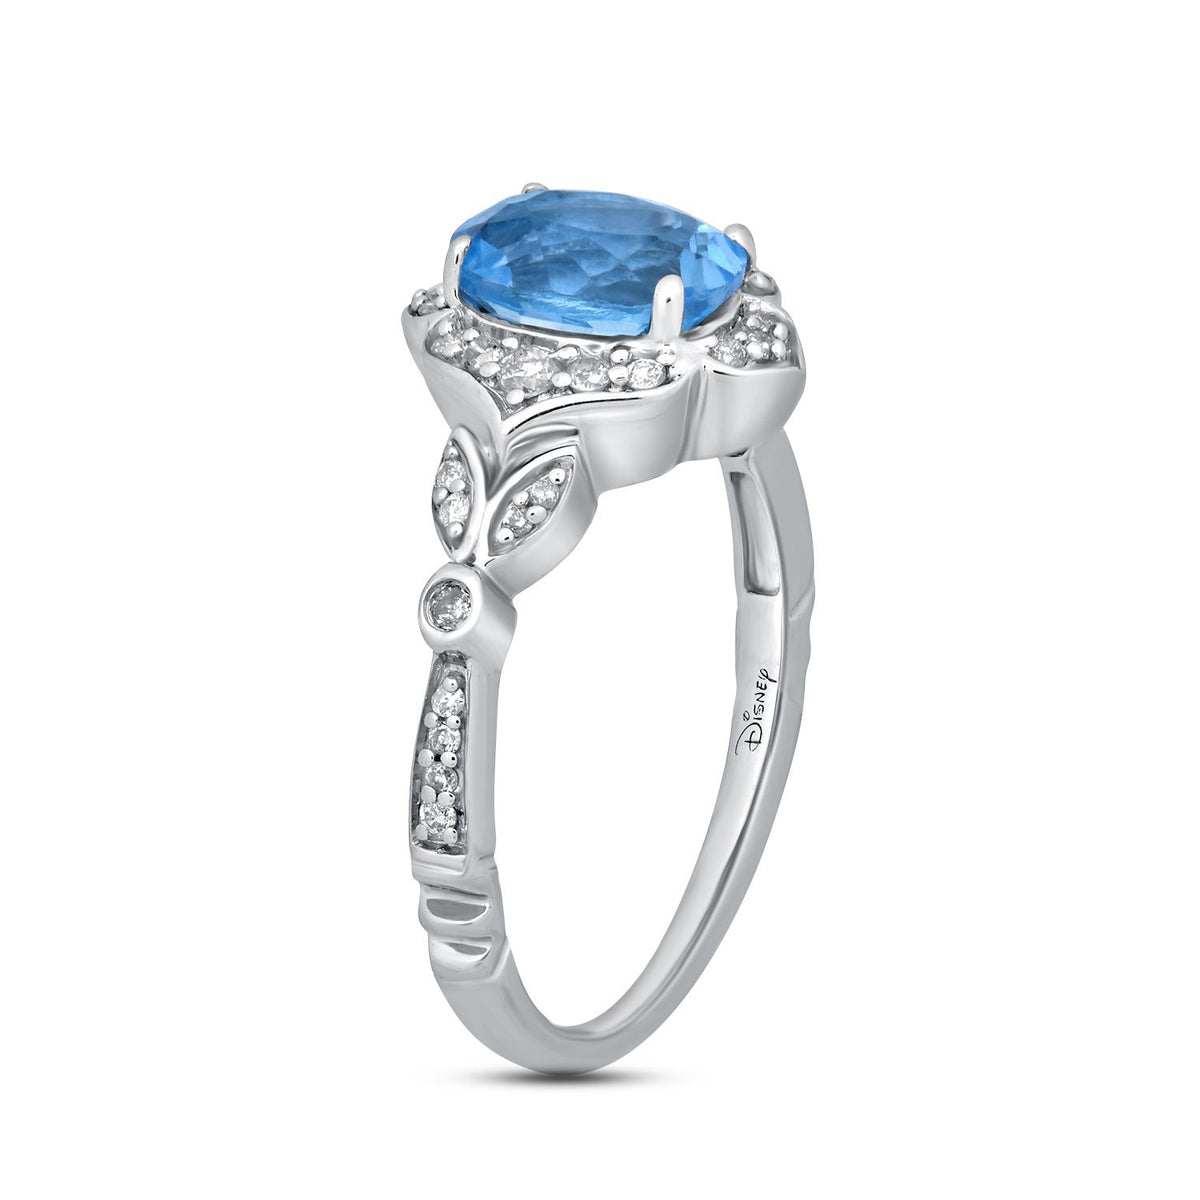 Disney Jasmine Inspired Diamond & Swiss Blue Topaz Star & Moon Ring in Sterling Silver and 10K Yellow Gold 1/6 Cttw | Enchanted Disney Fine Jewelry 7